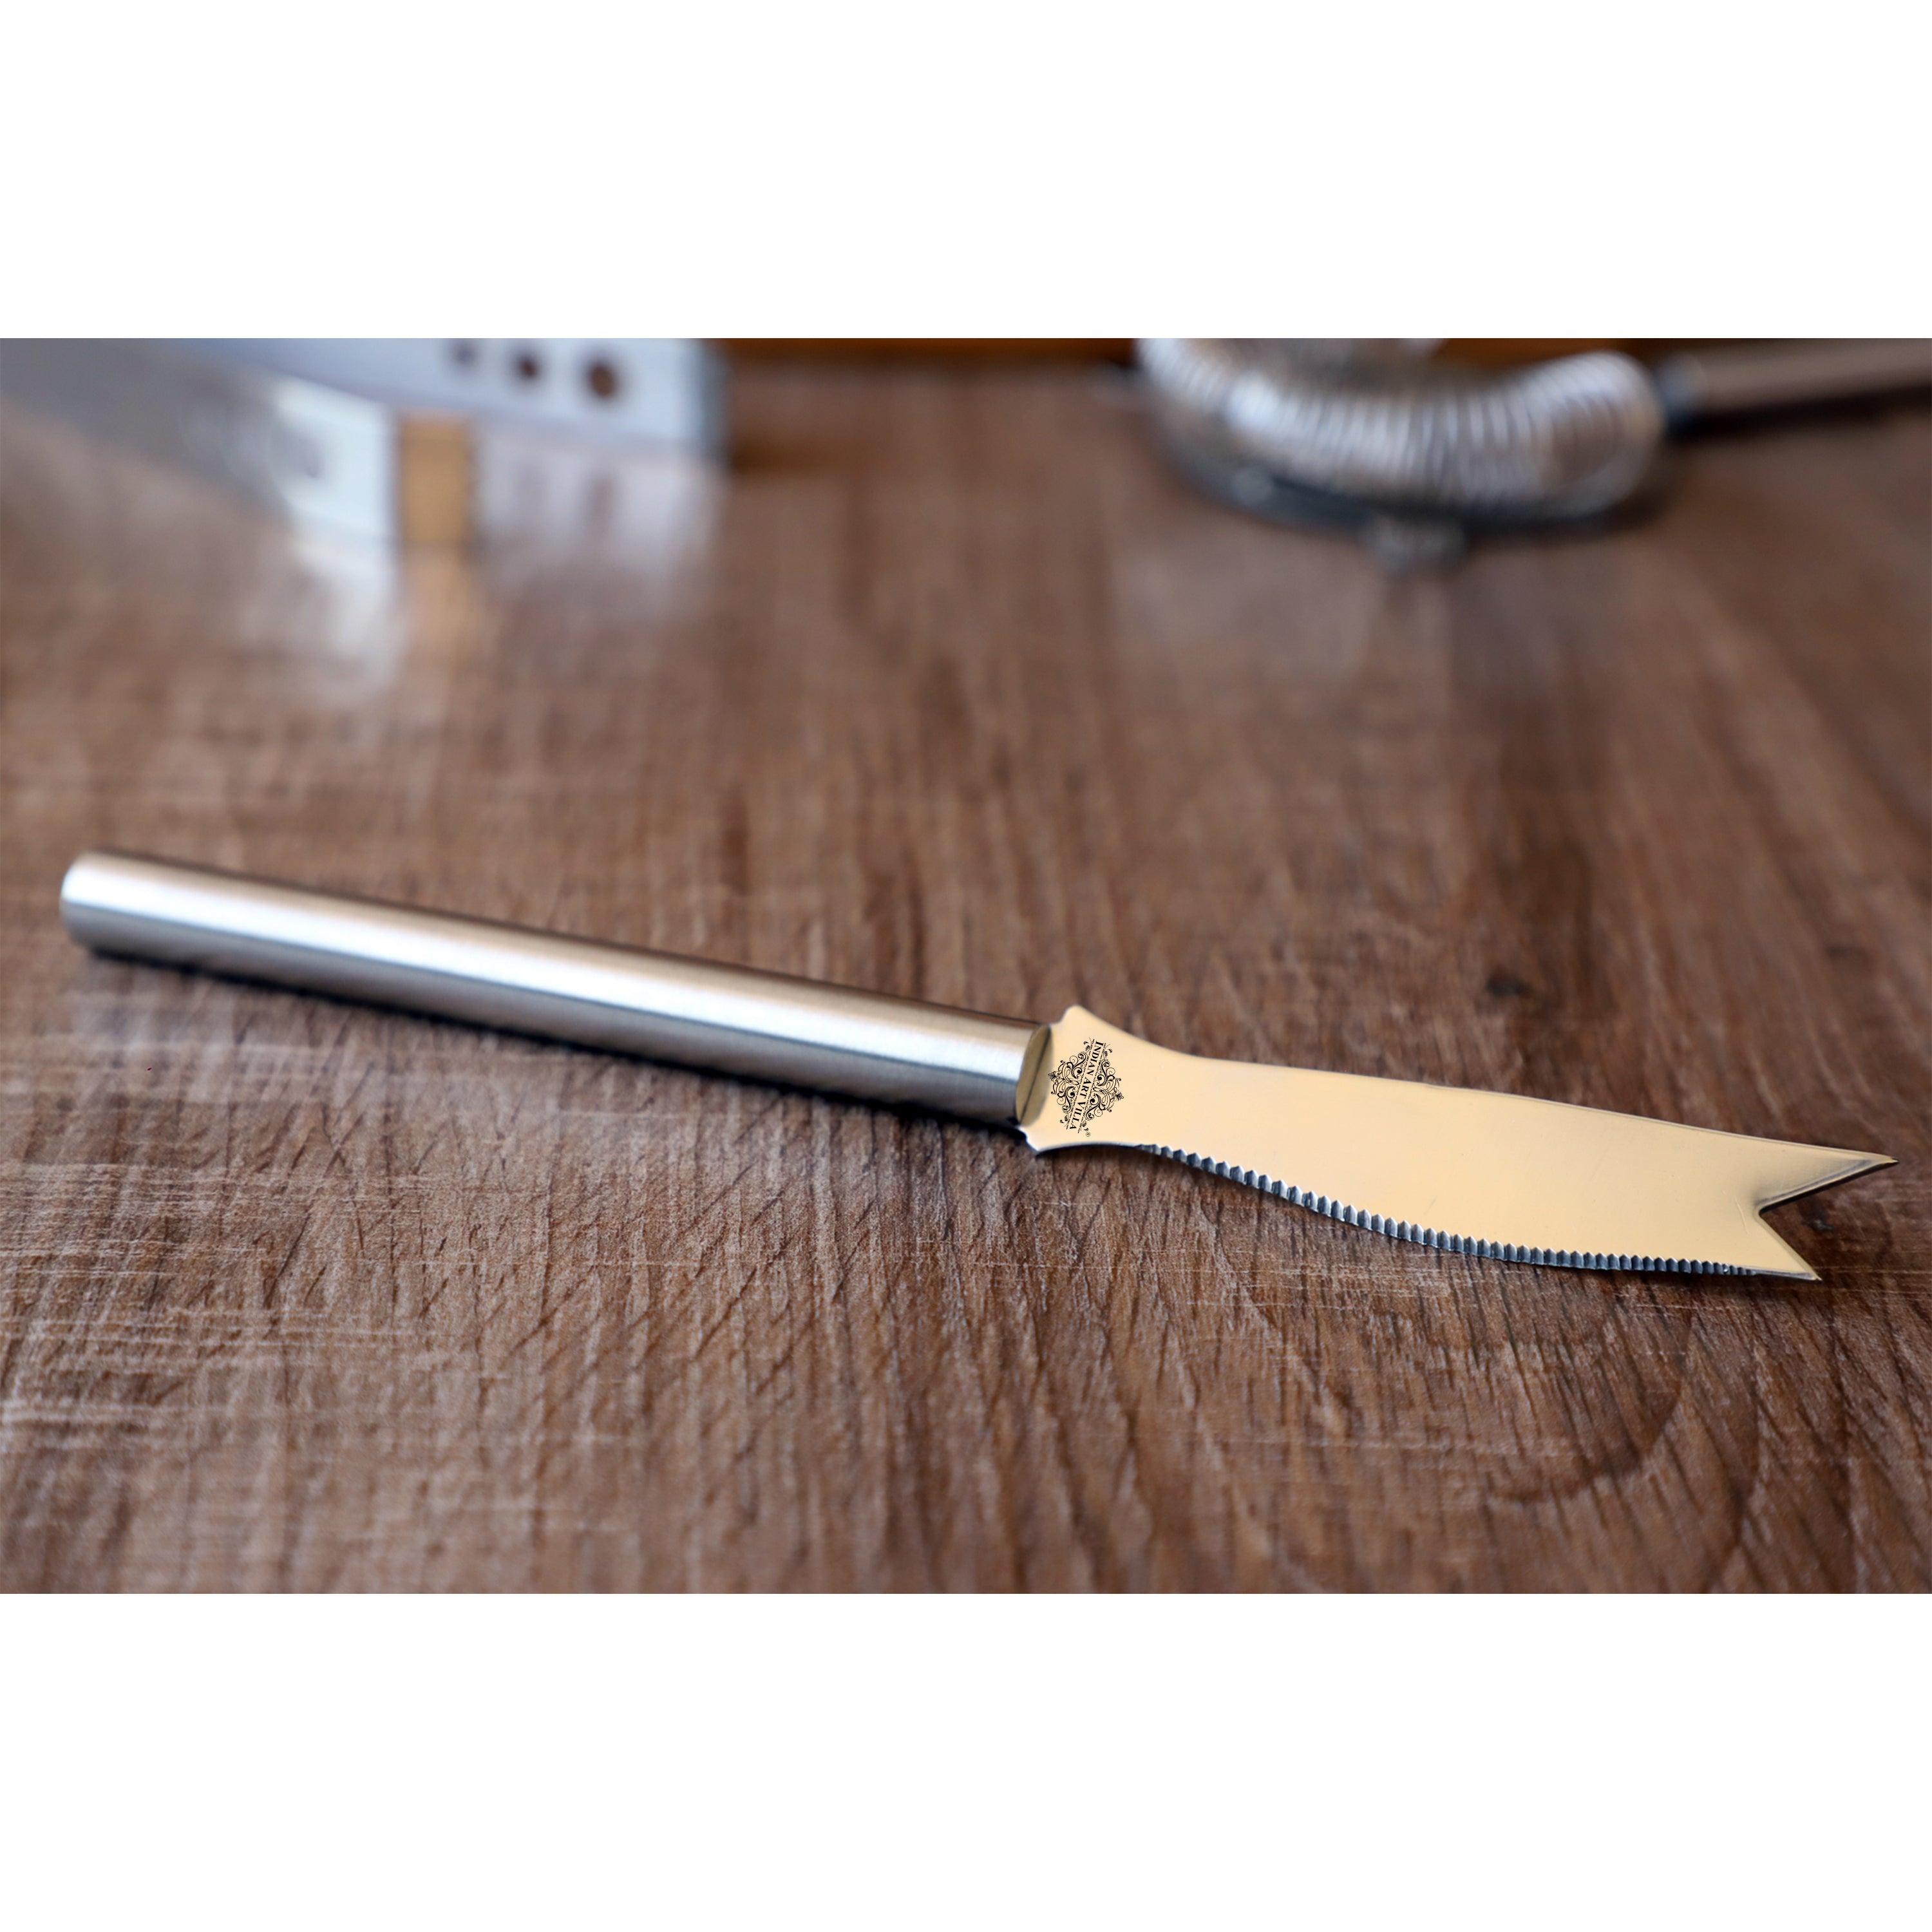 Buy Akanksha Arts Handmade Pure Brass Decorative Butter Knife Online at Low  Prices in India 